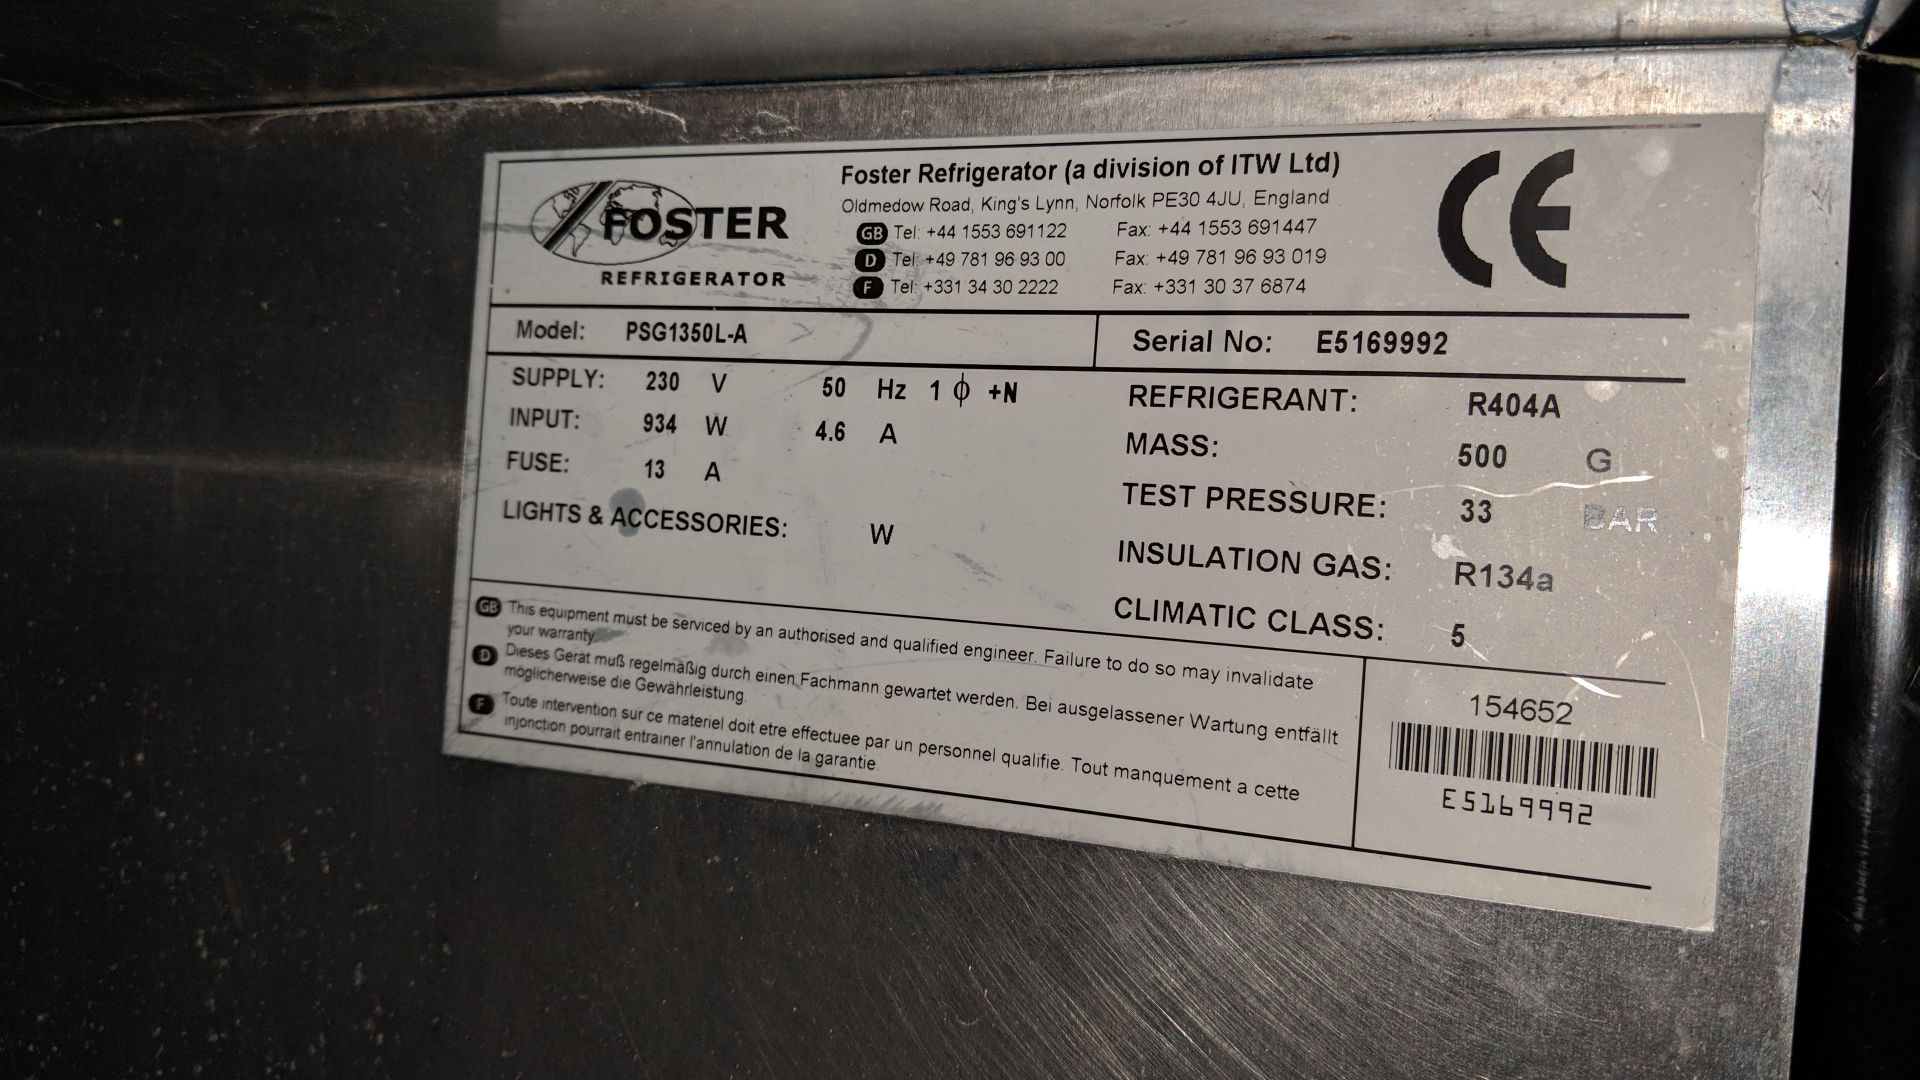 Foster large stainless steel wide mobile twin door freezer, PSG 1350L-A IMPORTANT: Please remember - Image 6 of 6